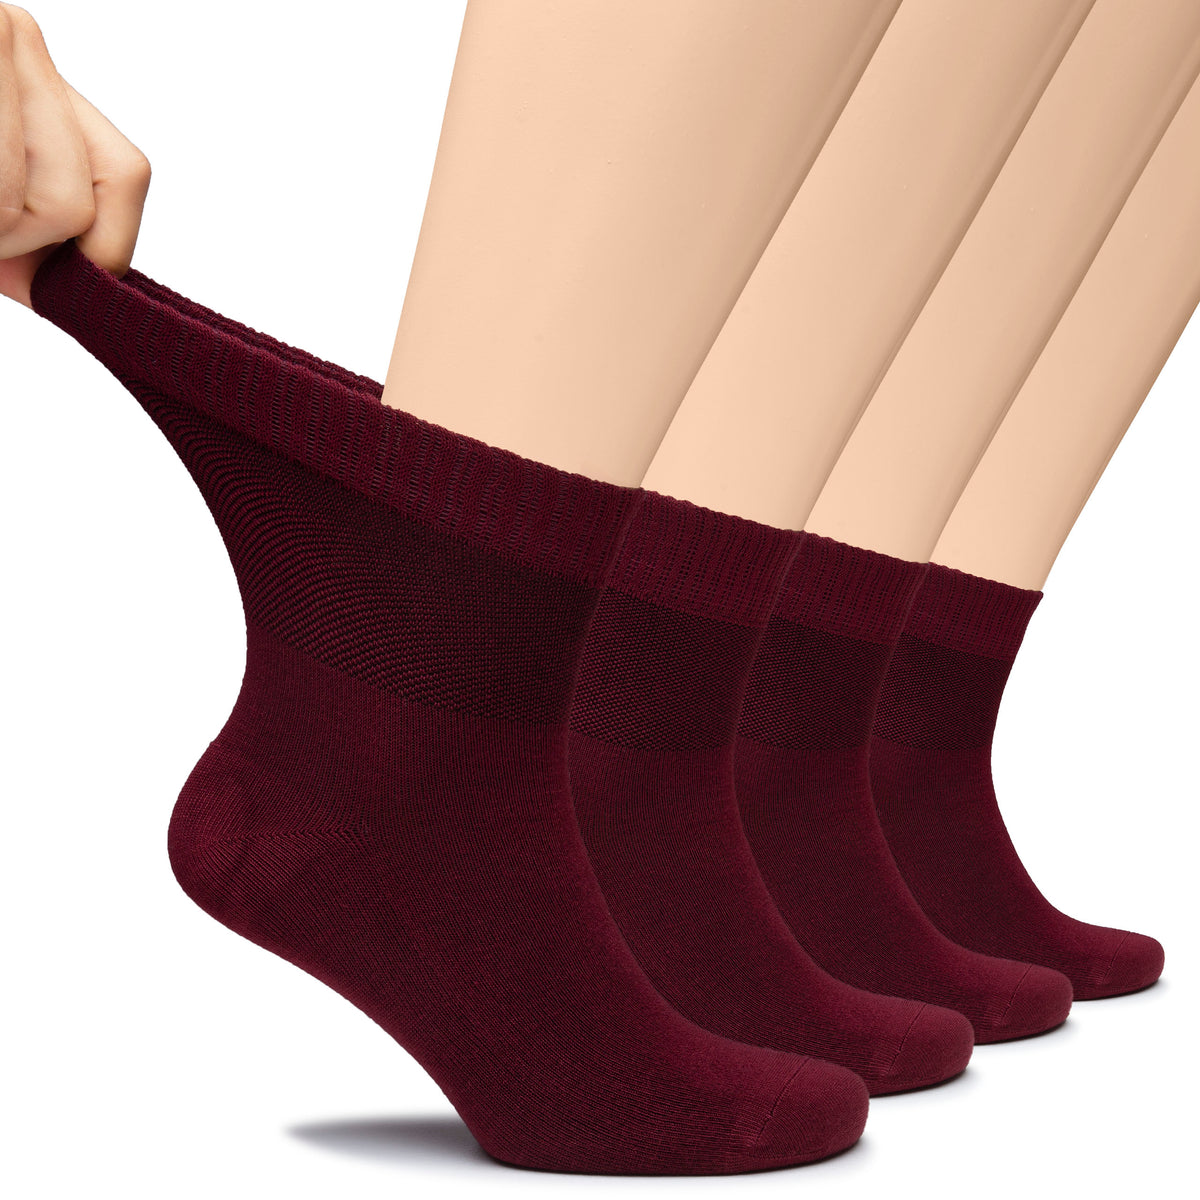 This image depicts two pair of maroon socks on a man's feet. The socks are Men's Bamboo Diabetic Socks, designed for comfort and support.